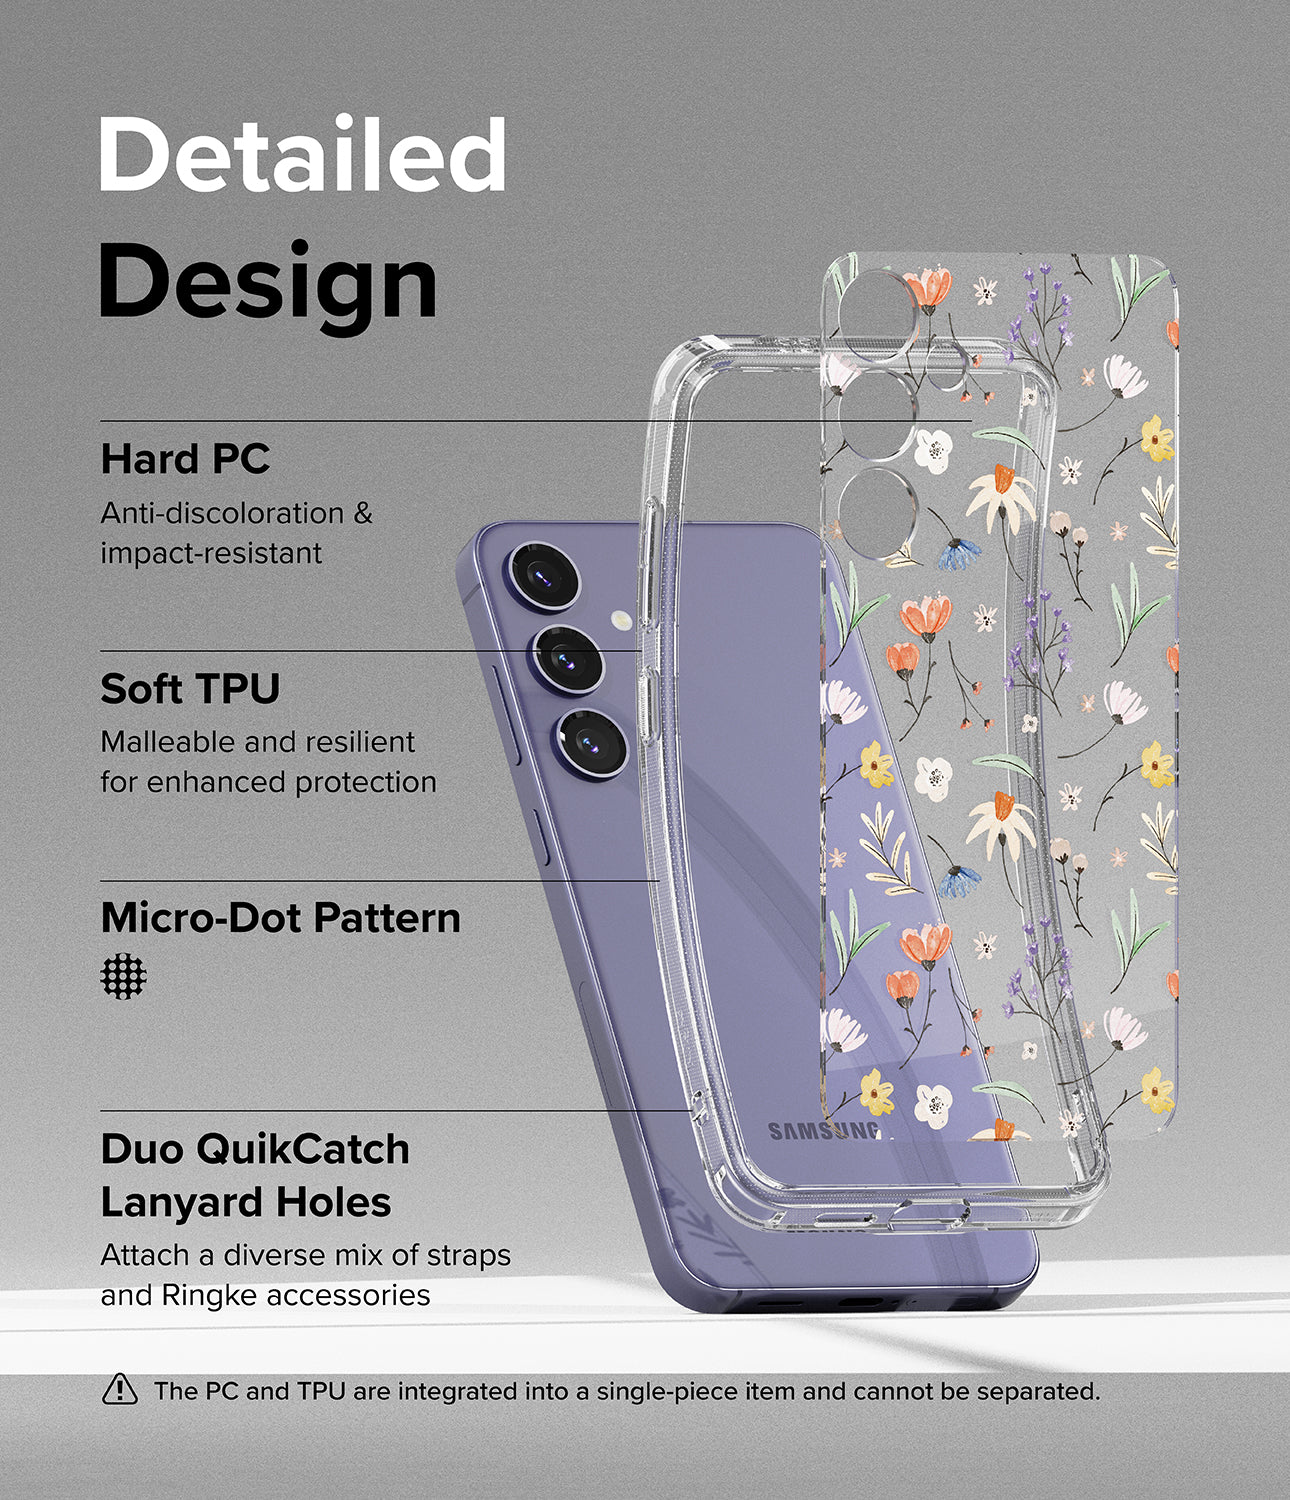 Galaxy S24 Plus Case | Fusion Design - Detailed Design. Anti-discoloration and impact-resistant with Hard PC. Malleable and resilient for enhanced protection with Soft TPU. Micro-Dot Pattern. Duo QuikCatch Lanyard Holes to attach a diverse mix of straps and Ringke accessories.